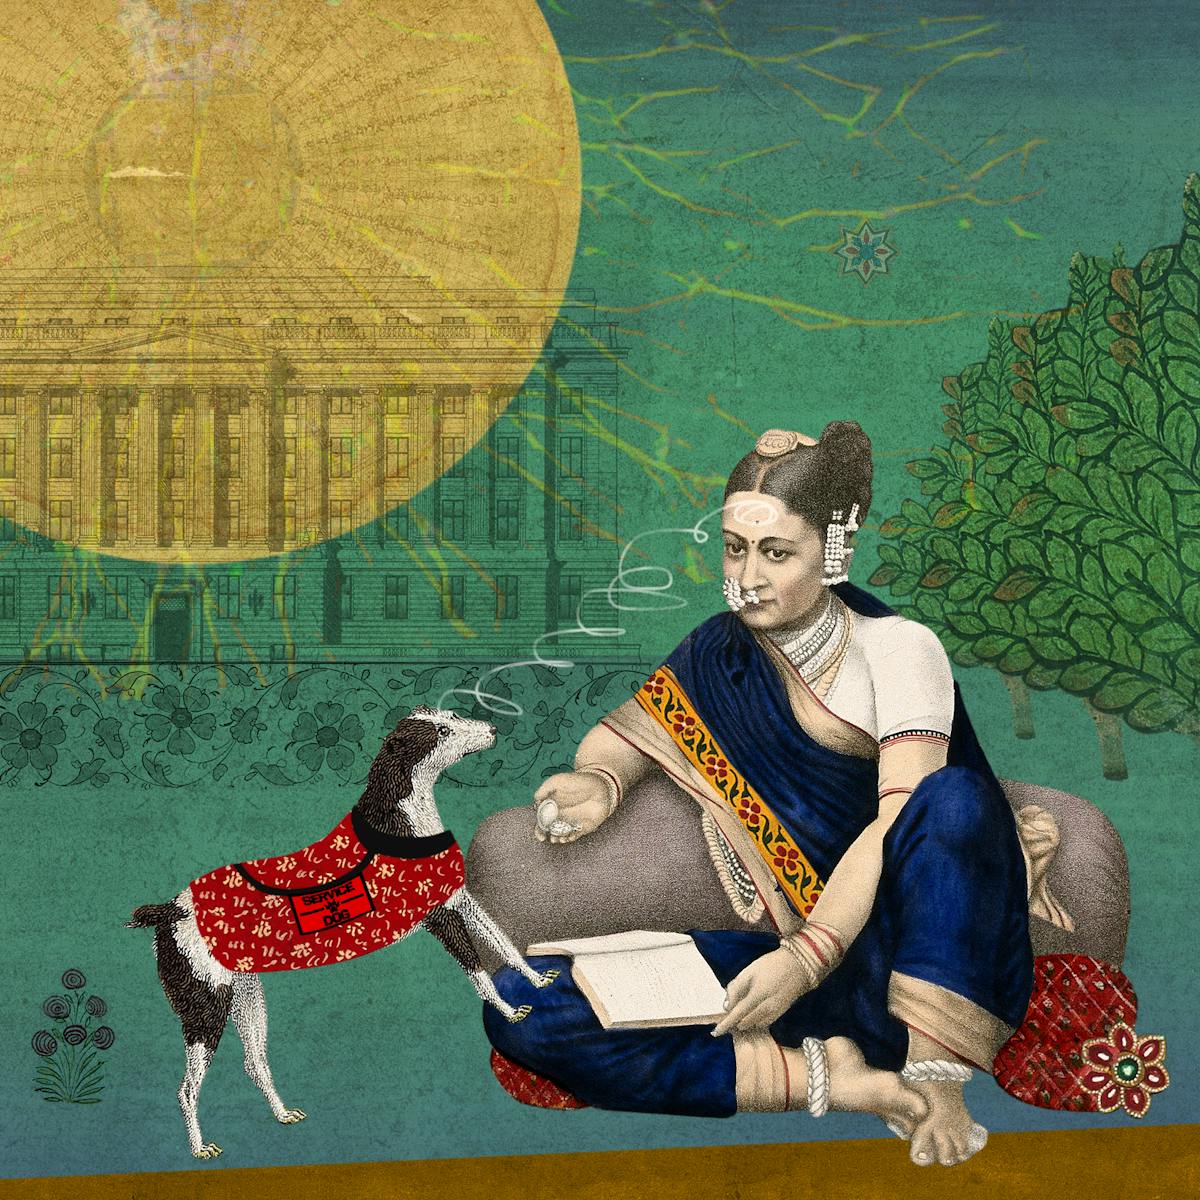 Illustration using a collage technique of archive material, etchings and drawings. The image shows a scene made up of mainly green and yellow hues. To the right of centre is a woman sitting on the ground a book open on her lap. In front of her a black and white dog wearing a red jacket with the words 'service dog' written on the side, rest their front paws on her leg. A white spiralling line links their foreheads together. To the left of the illustration flowers and exotic birds rest on branches. In the background the faint front elevation of a building can be seen, over which a large golden illustration of a sun radiates outwards.